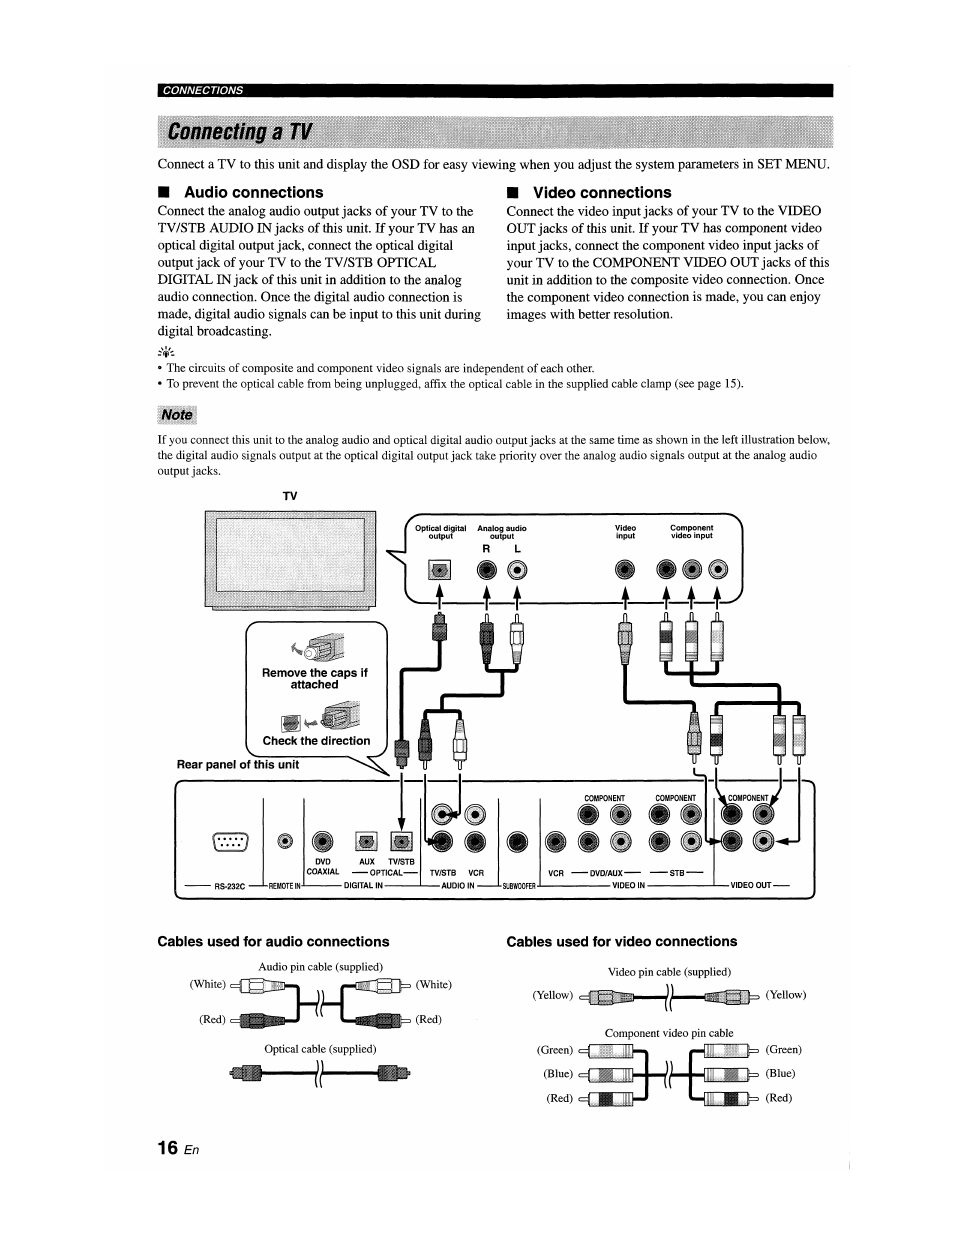 Conneeting a tv, Audio connections, Video connections | Note, Cables used for audio connections, Cables used for video connections, Connecting a tv | Yamaha YSP-1100 User Manual | Page 20 / 104